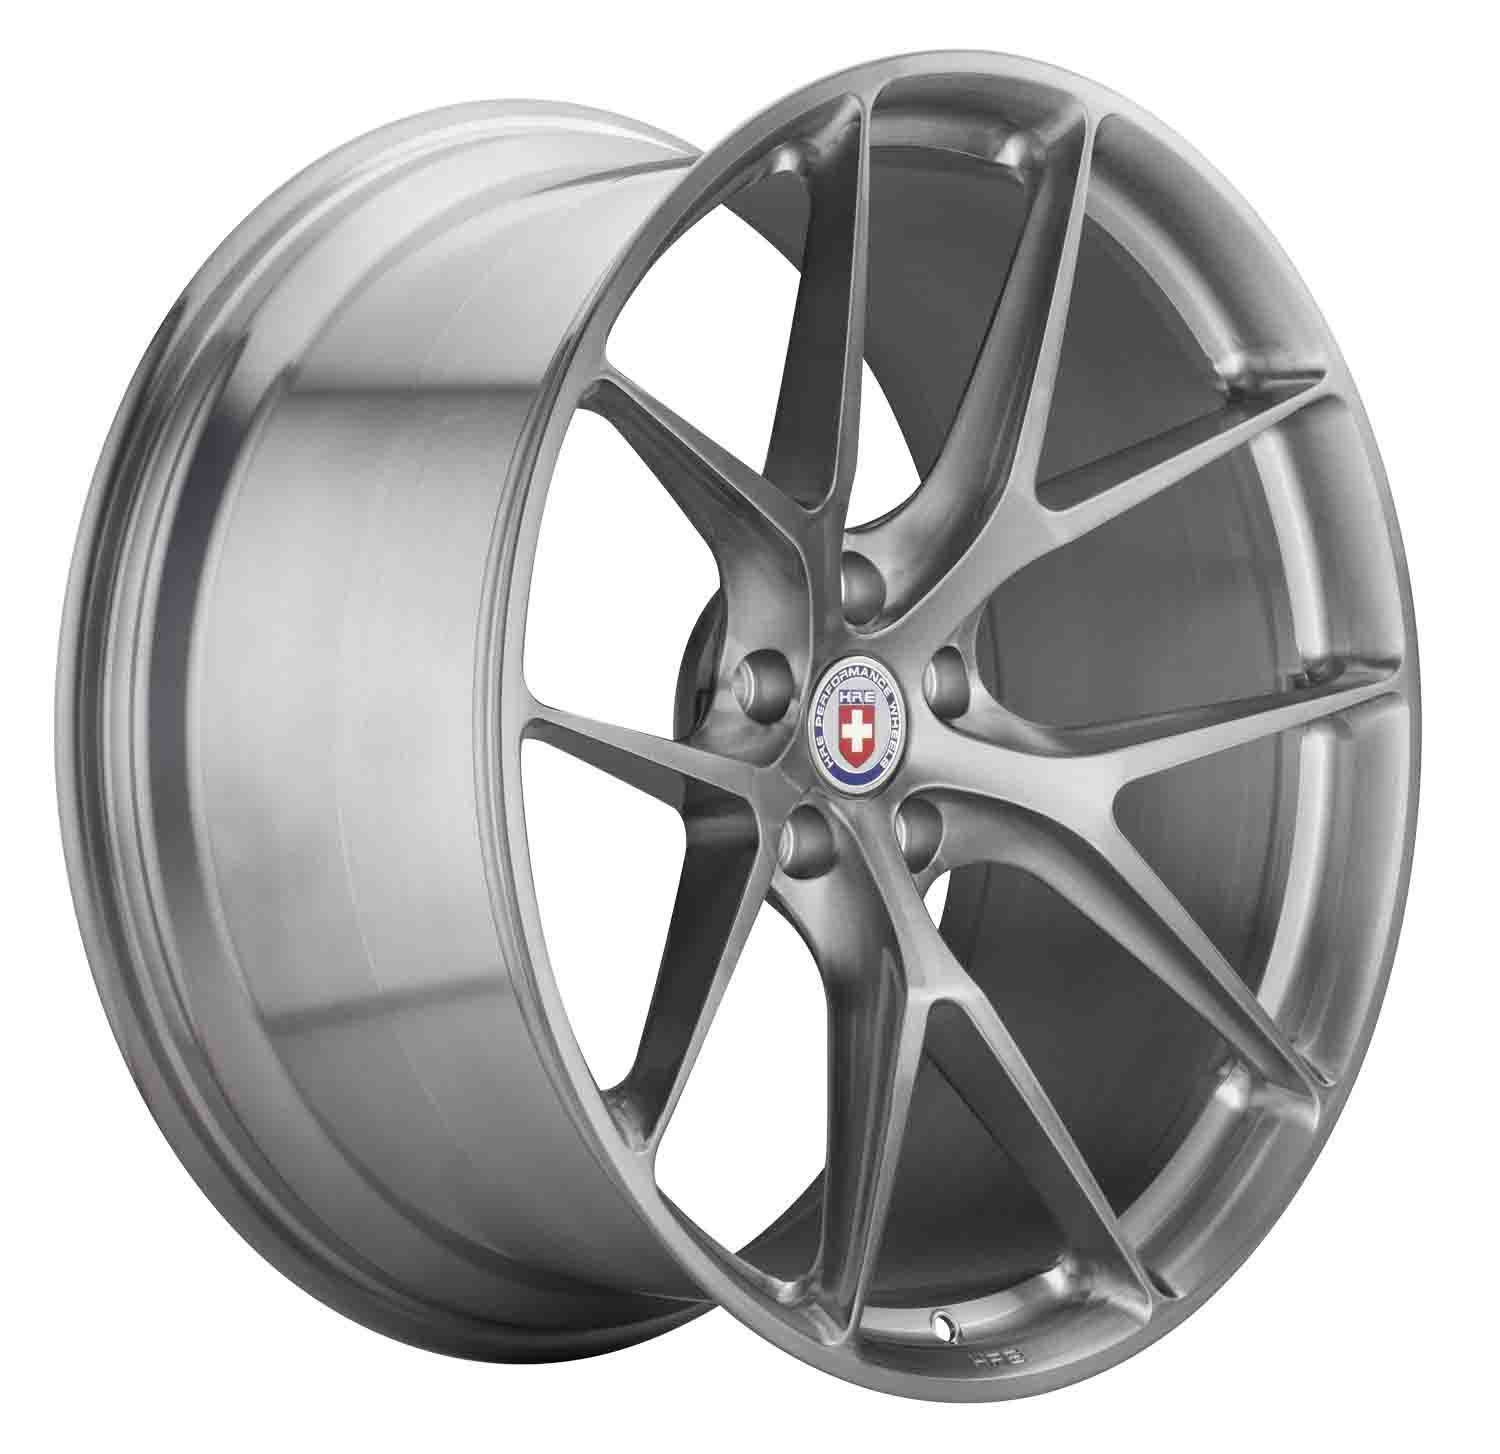 HRE P101 (P1 Series) forged wheels